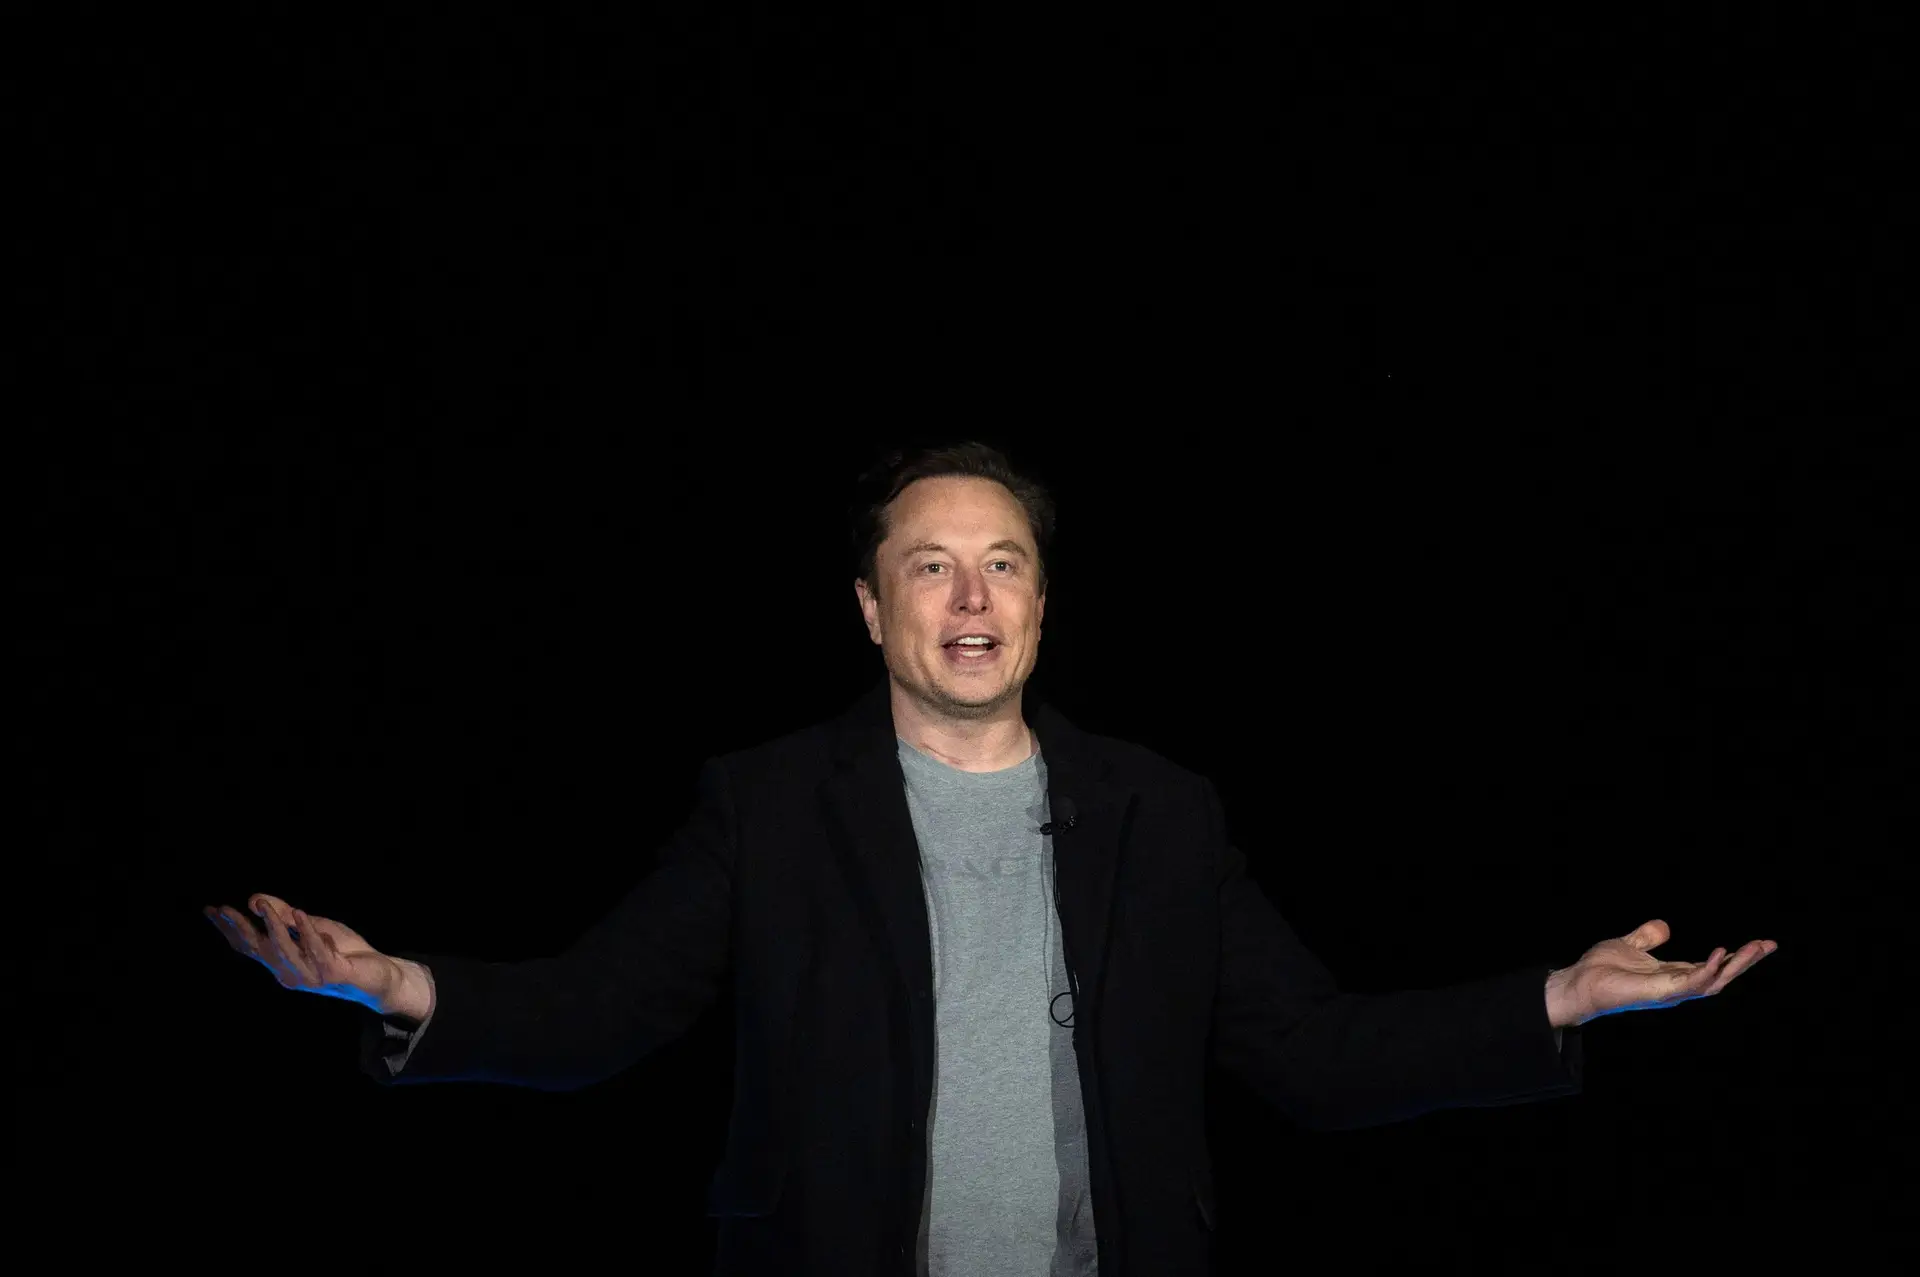 Elon Musk gestures as he speaks during a press conference at SpaceX’s Starbase facility near Boca Chica Village in South Texas on February 10, 2022. – Billionaire entrepreneur Elon Musk delivered an eagerly-awaited update on SpaceX’s Starship, a prototype rocket the company is developing for crewed interplanetary exploration. (Photo by JIM WATSON / AFP) (Photo by JIM WATSON/AFP via Getty Images)